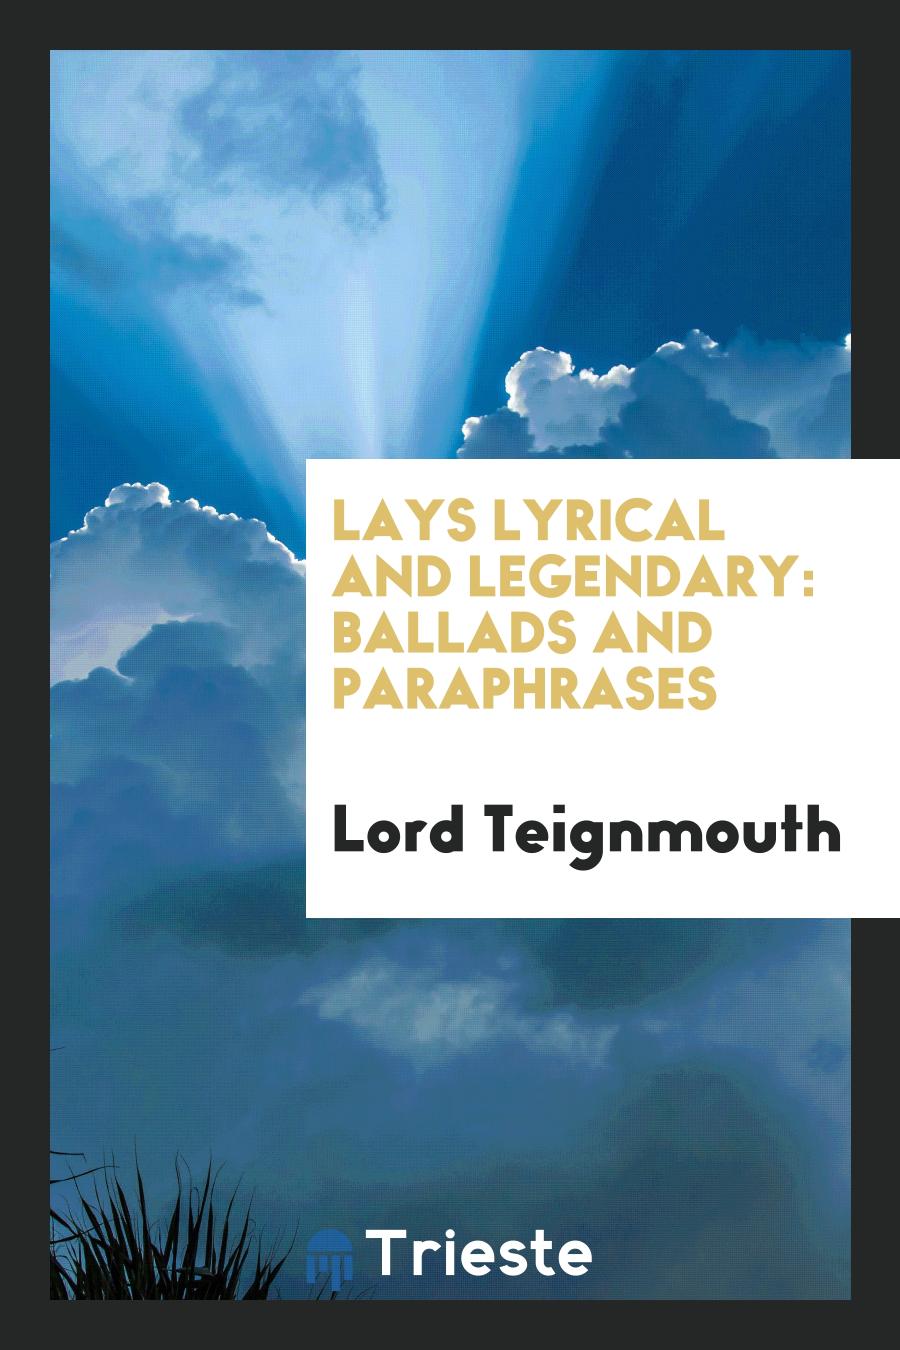 Lays Lyrical and Legendary: Ballads and Paraphrases